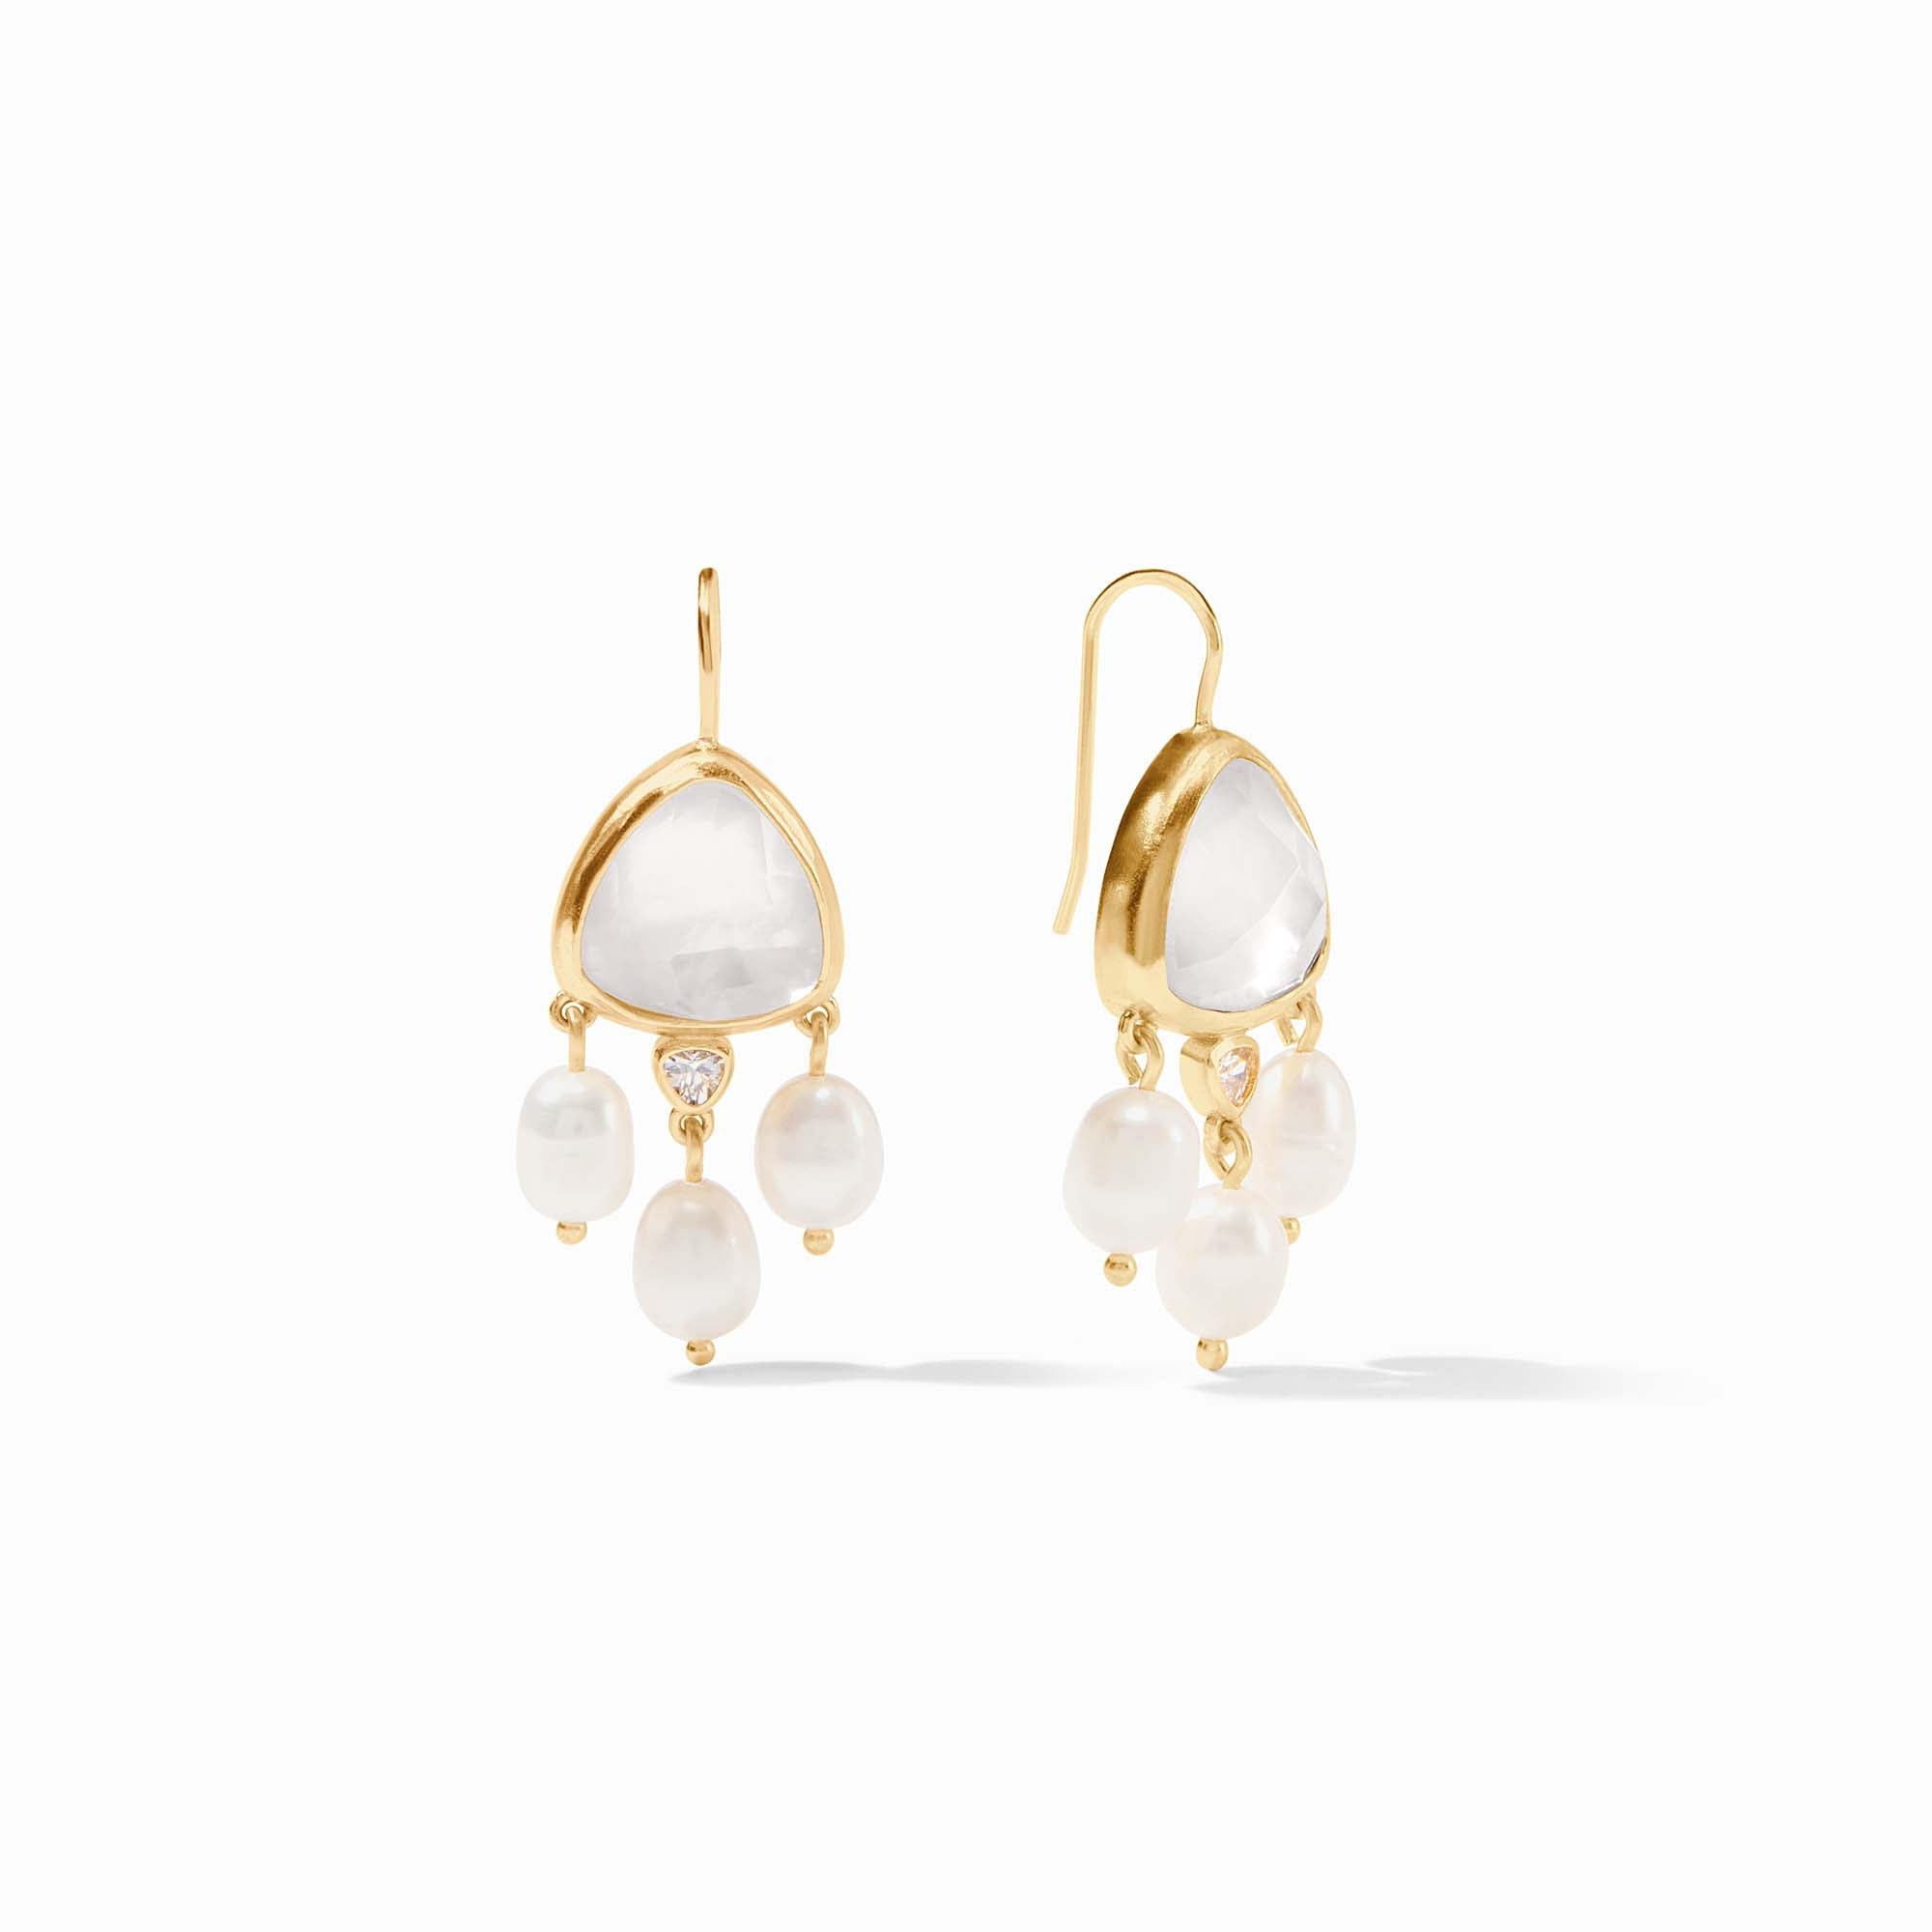 Julie Vos - Aquitaine Chandelier Earring, Iridescent Clear Crystal